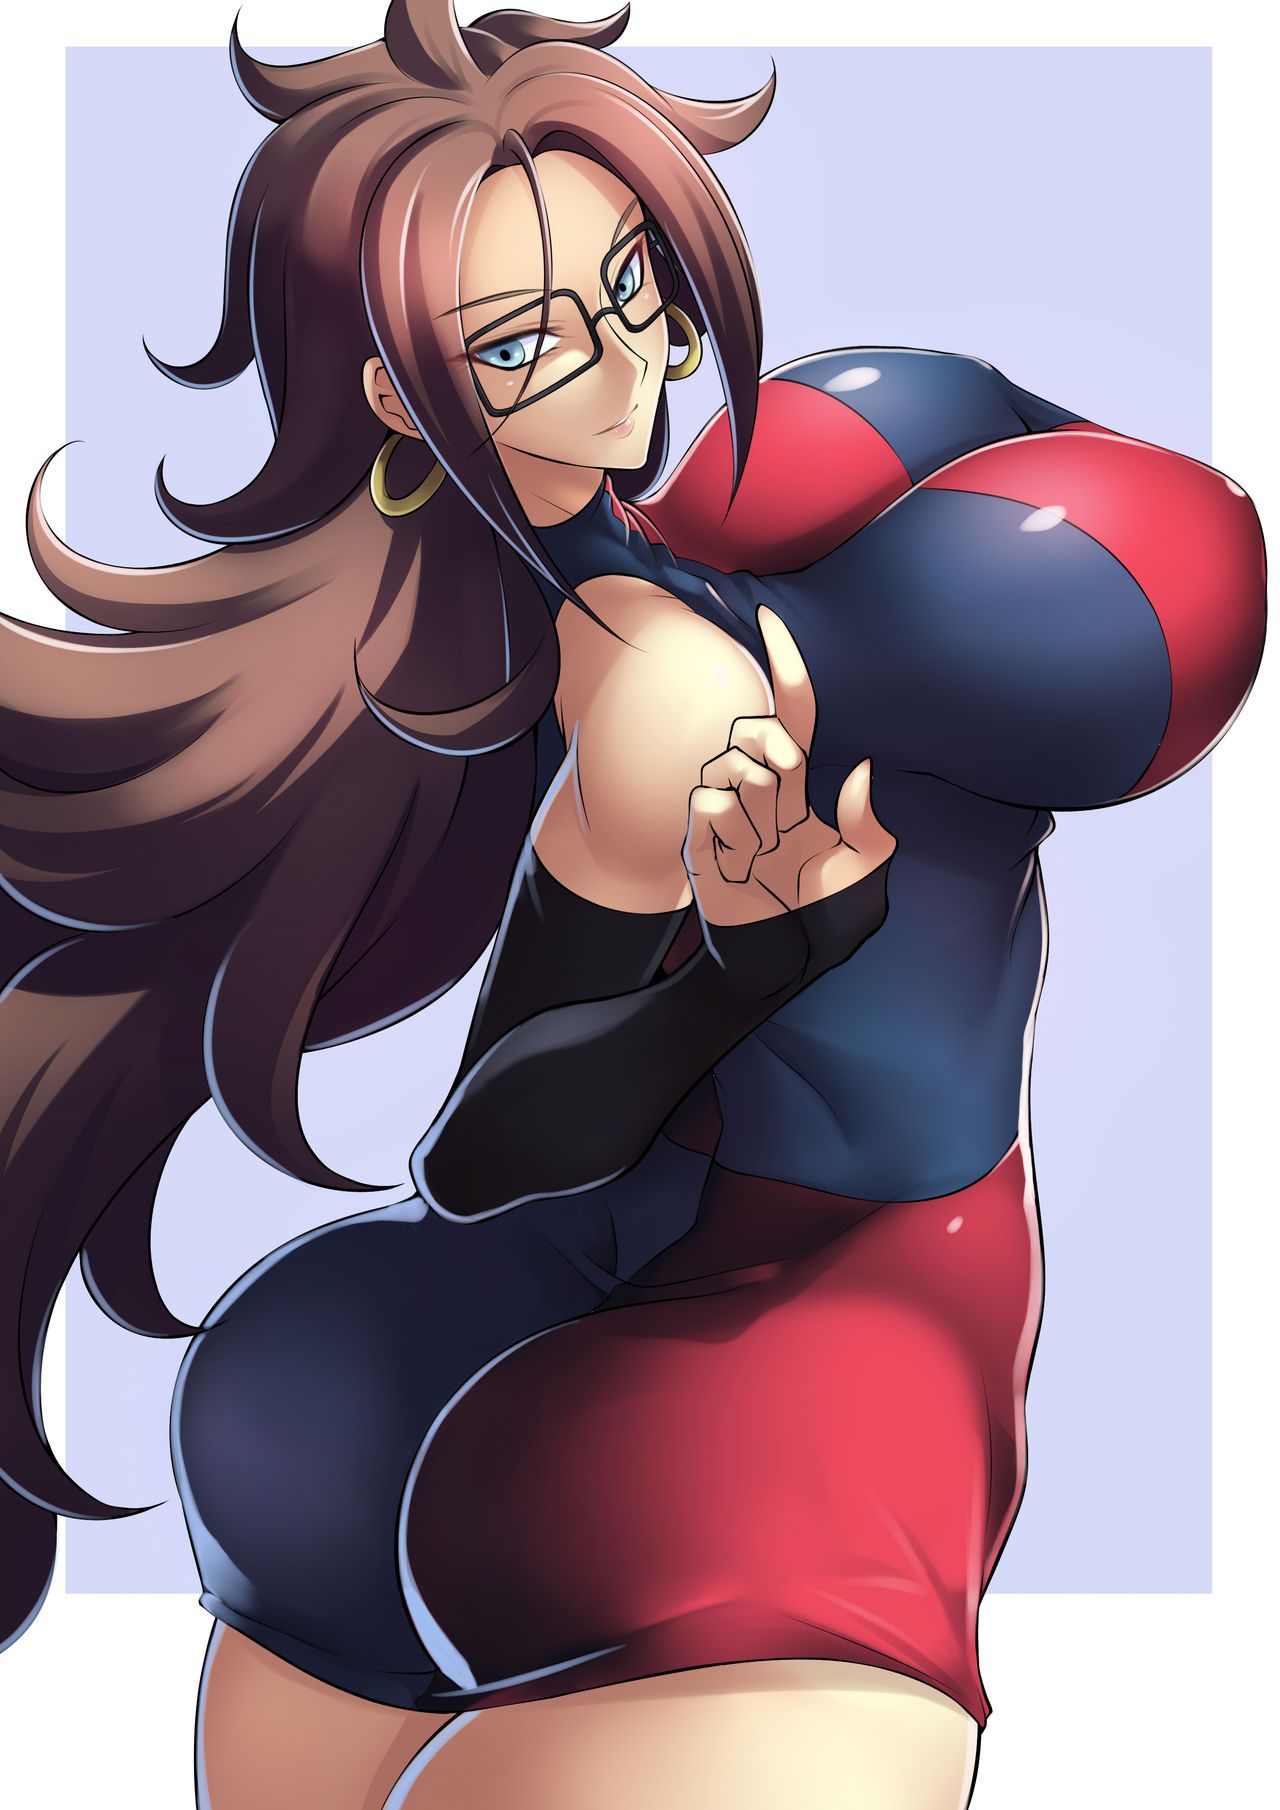 My Favorite Android 21 Pics 72